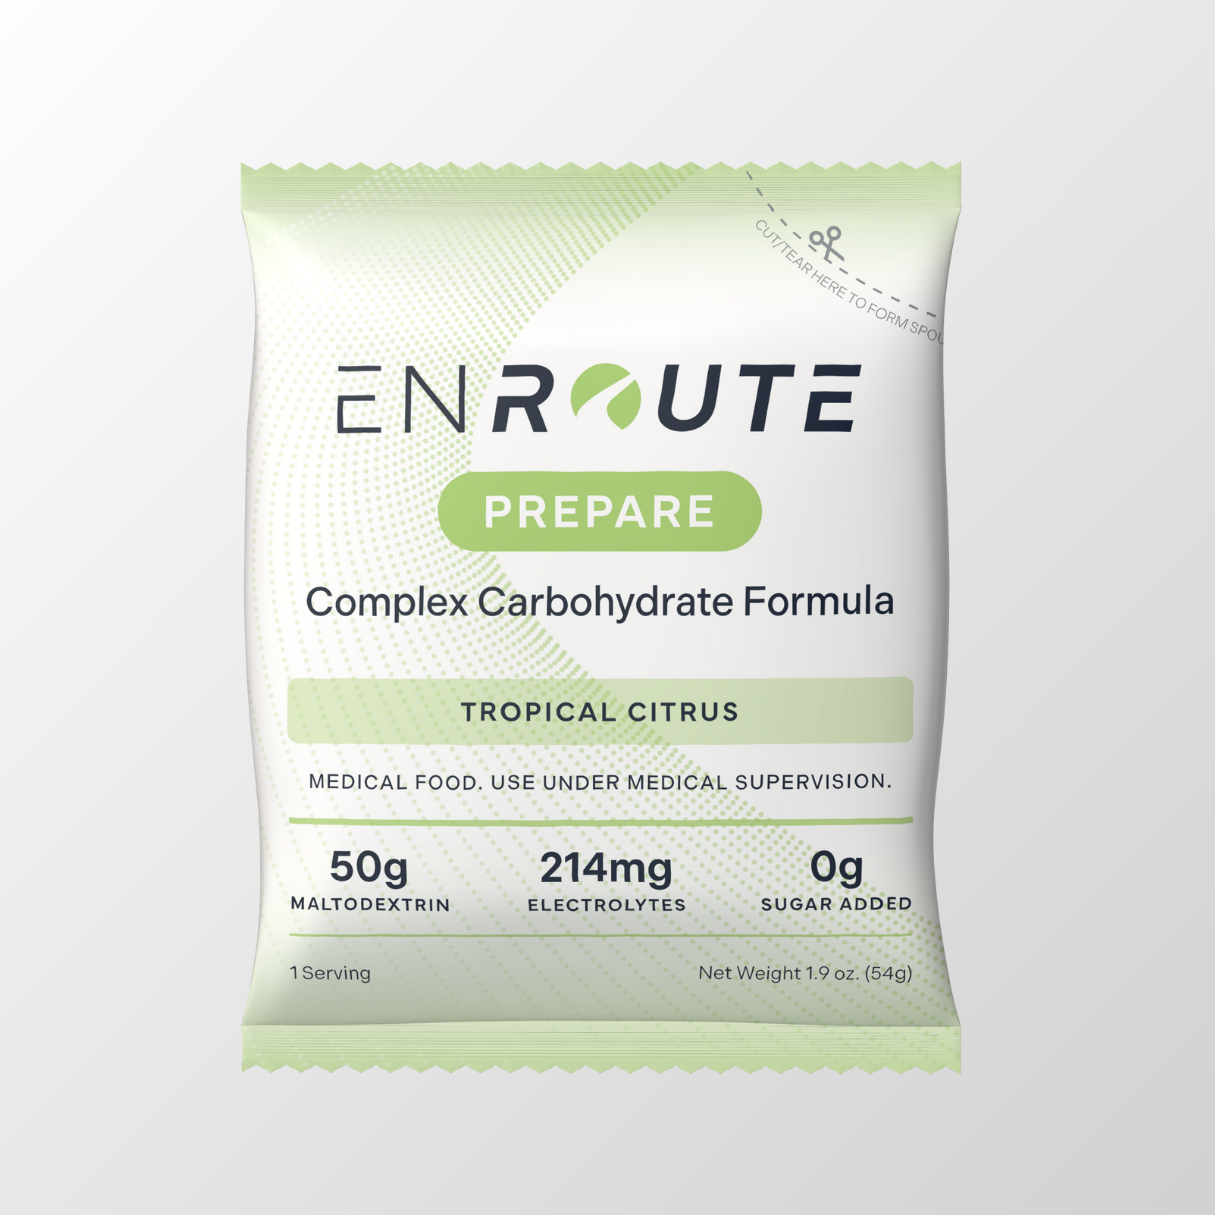 ENROUTE Prepare Complex Carbohydrate Formula in Tropical Citrus Flavor. Medical Food. Use under medical supervision. Contains 50g maltodextrin, 214mg electrolytes, 0g sugar added